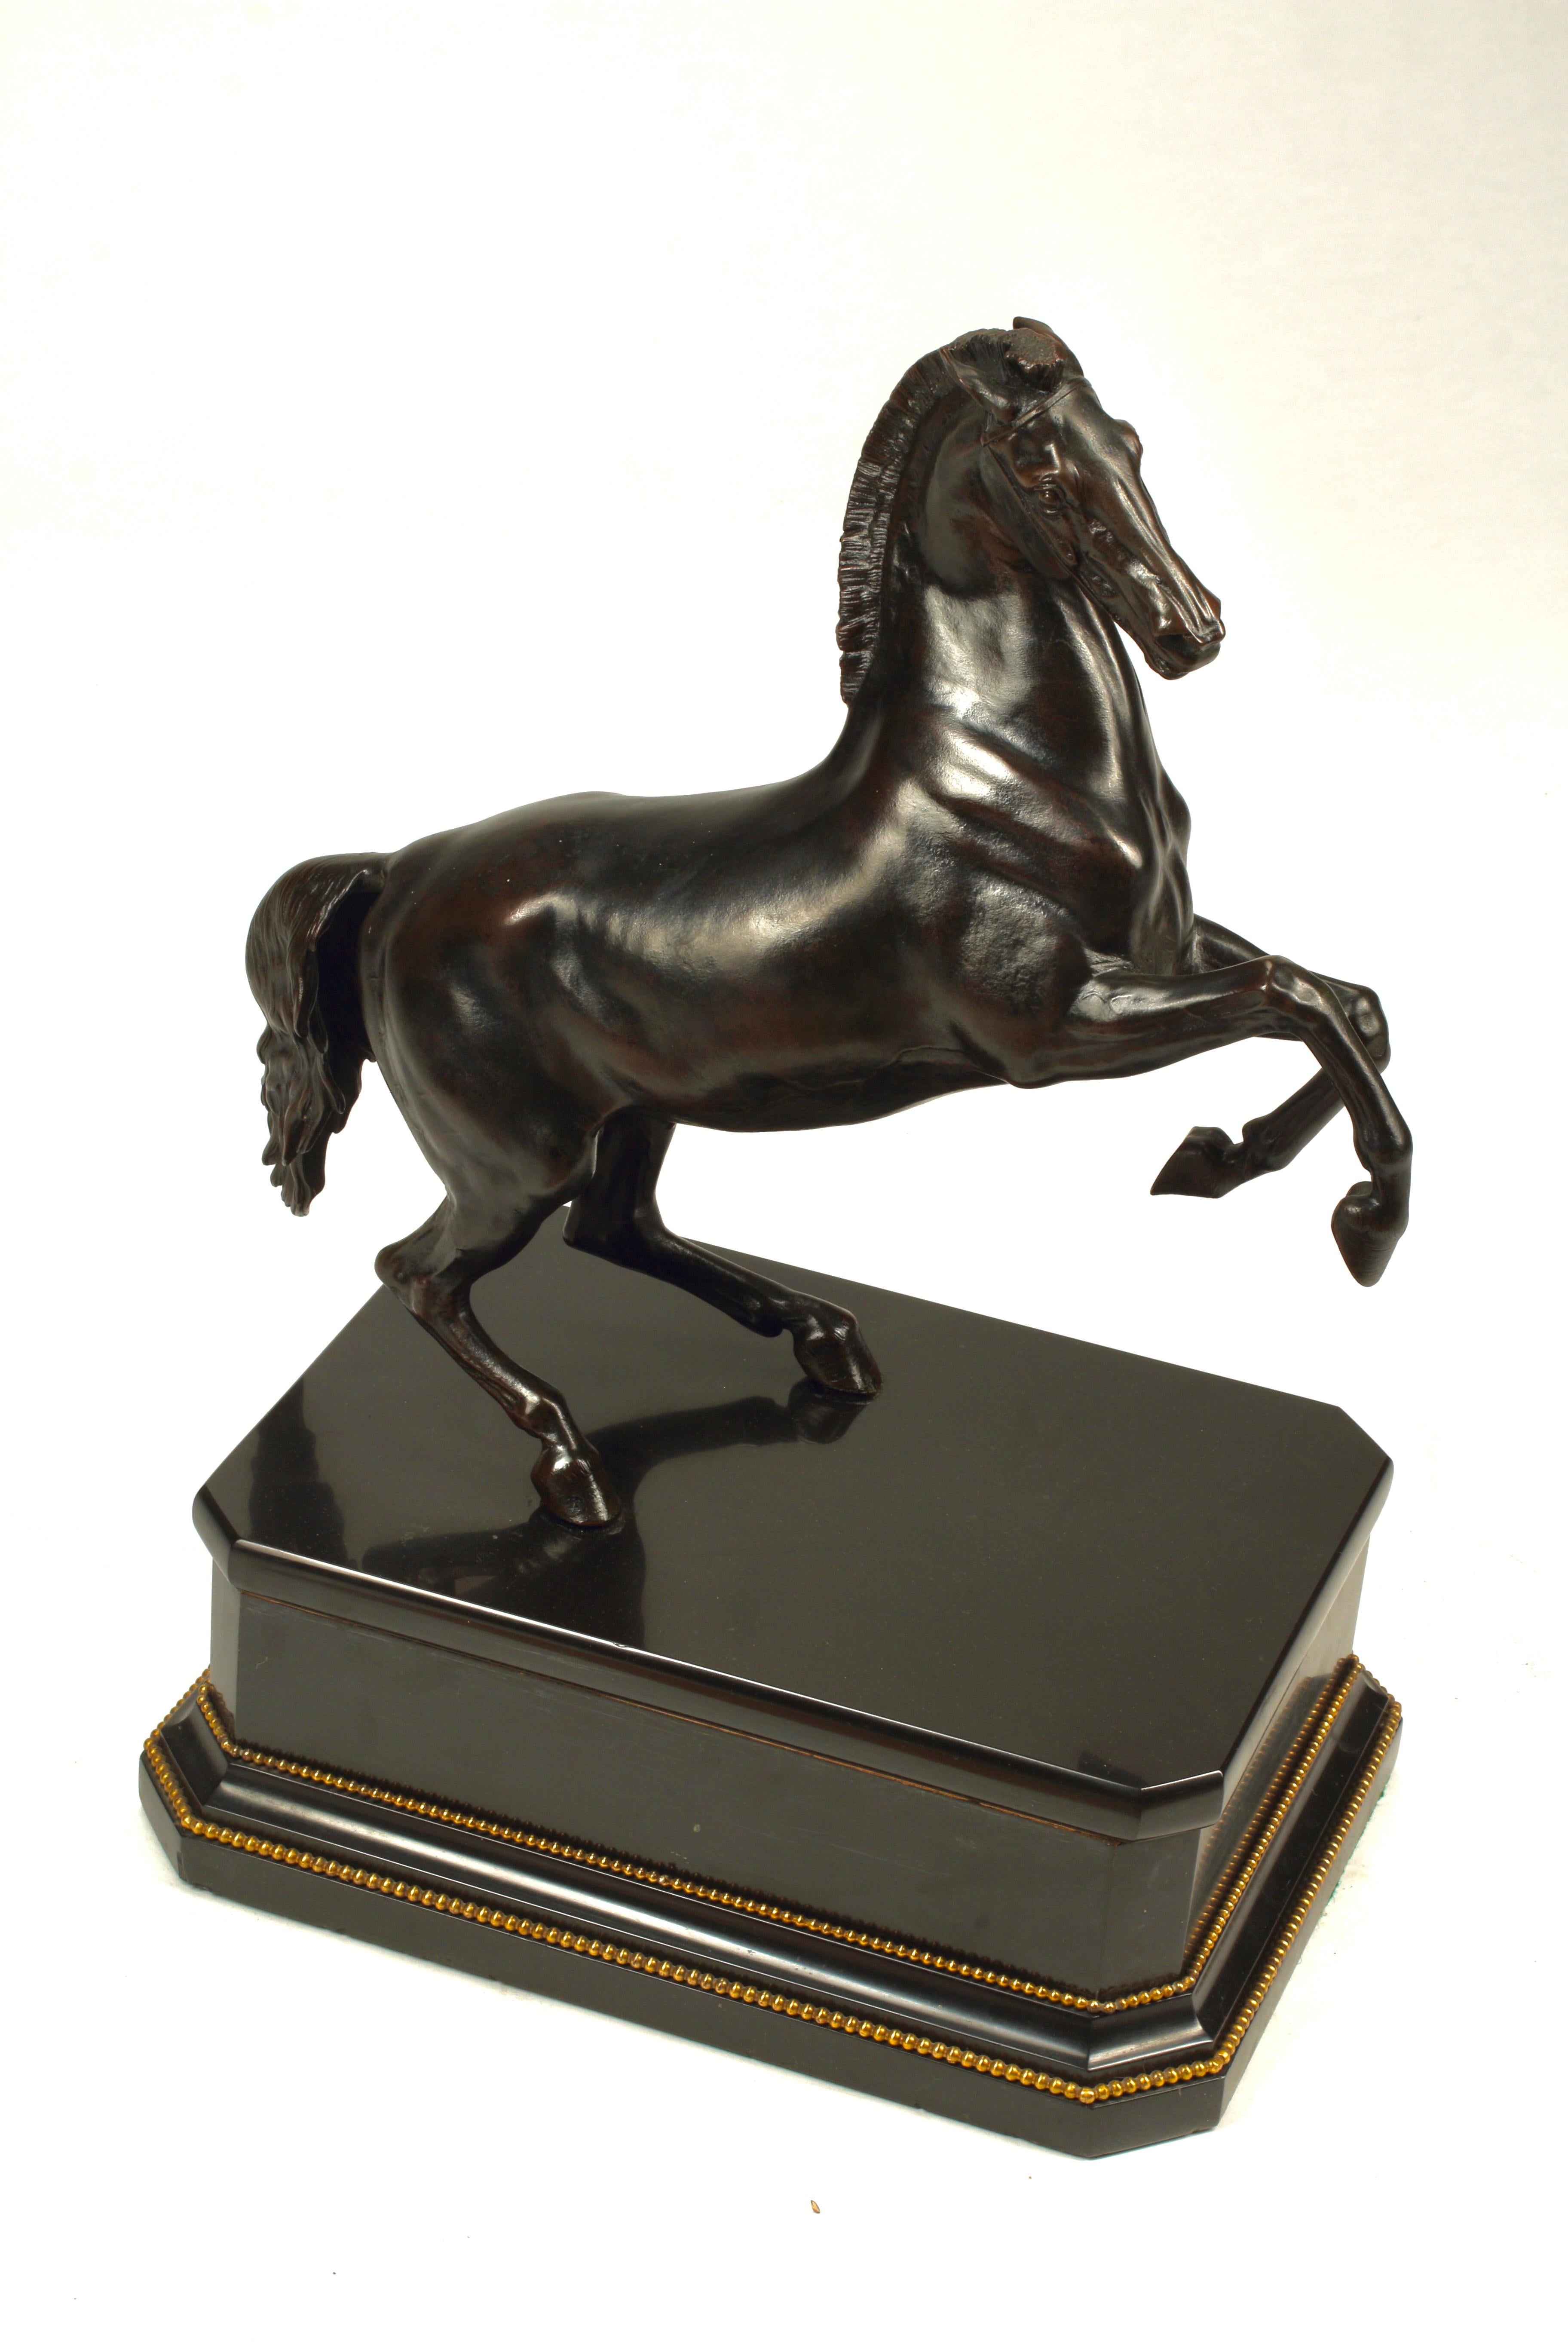 A handsome 19th century Continental patinated bronze model of a rearing horse on a bronze mounted black marble plinth. Exhibits a dark brown patina to surface. General marks, scratches, rubbing, wear consistent with age and use of piece.